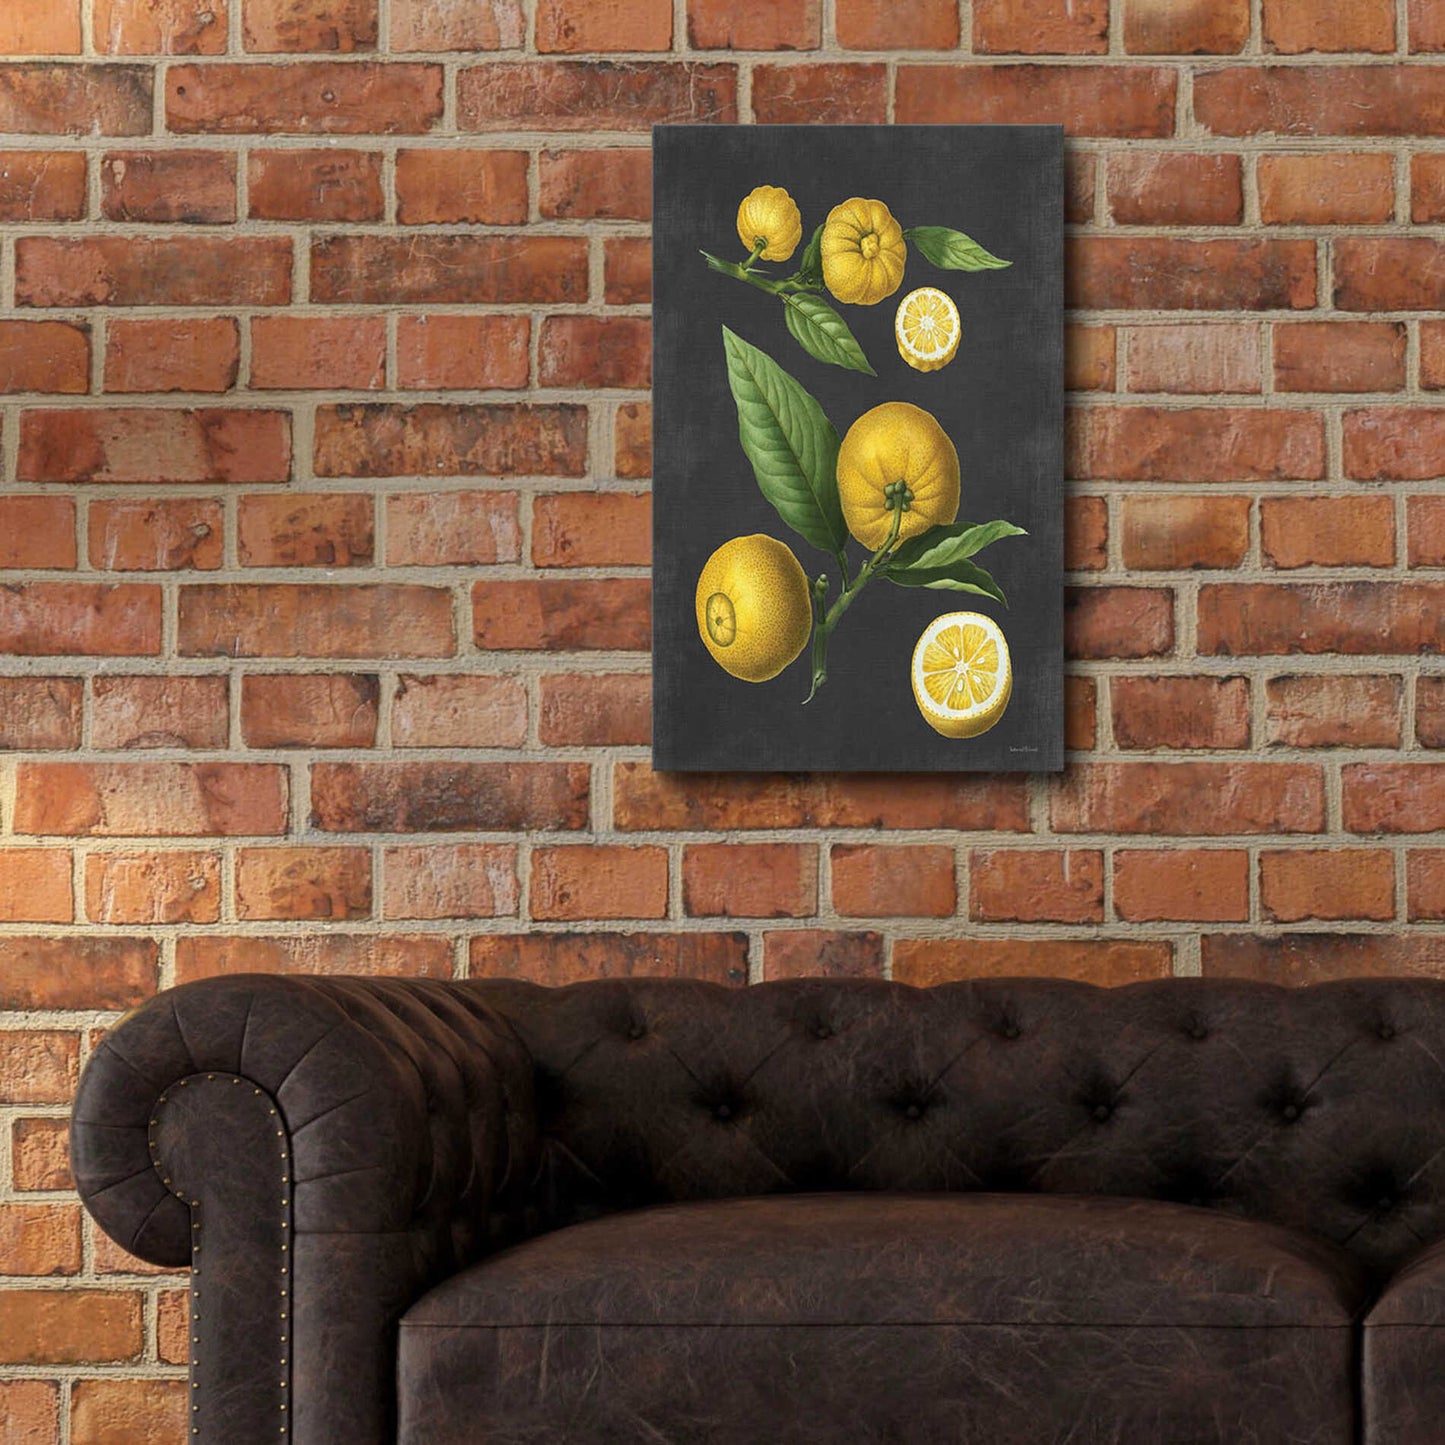 Epic Art 'Lemon Citrus' by lettered & lined, Acrylic Glass Wall Art,16x24